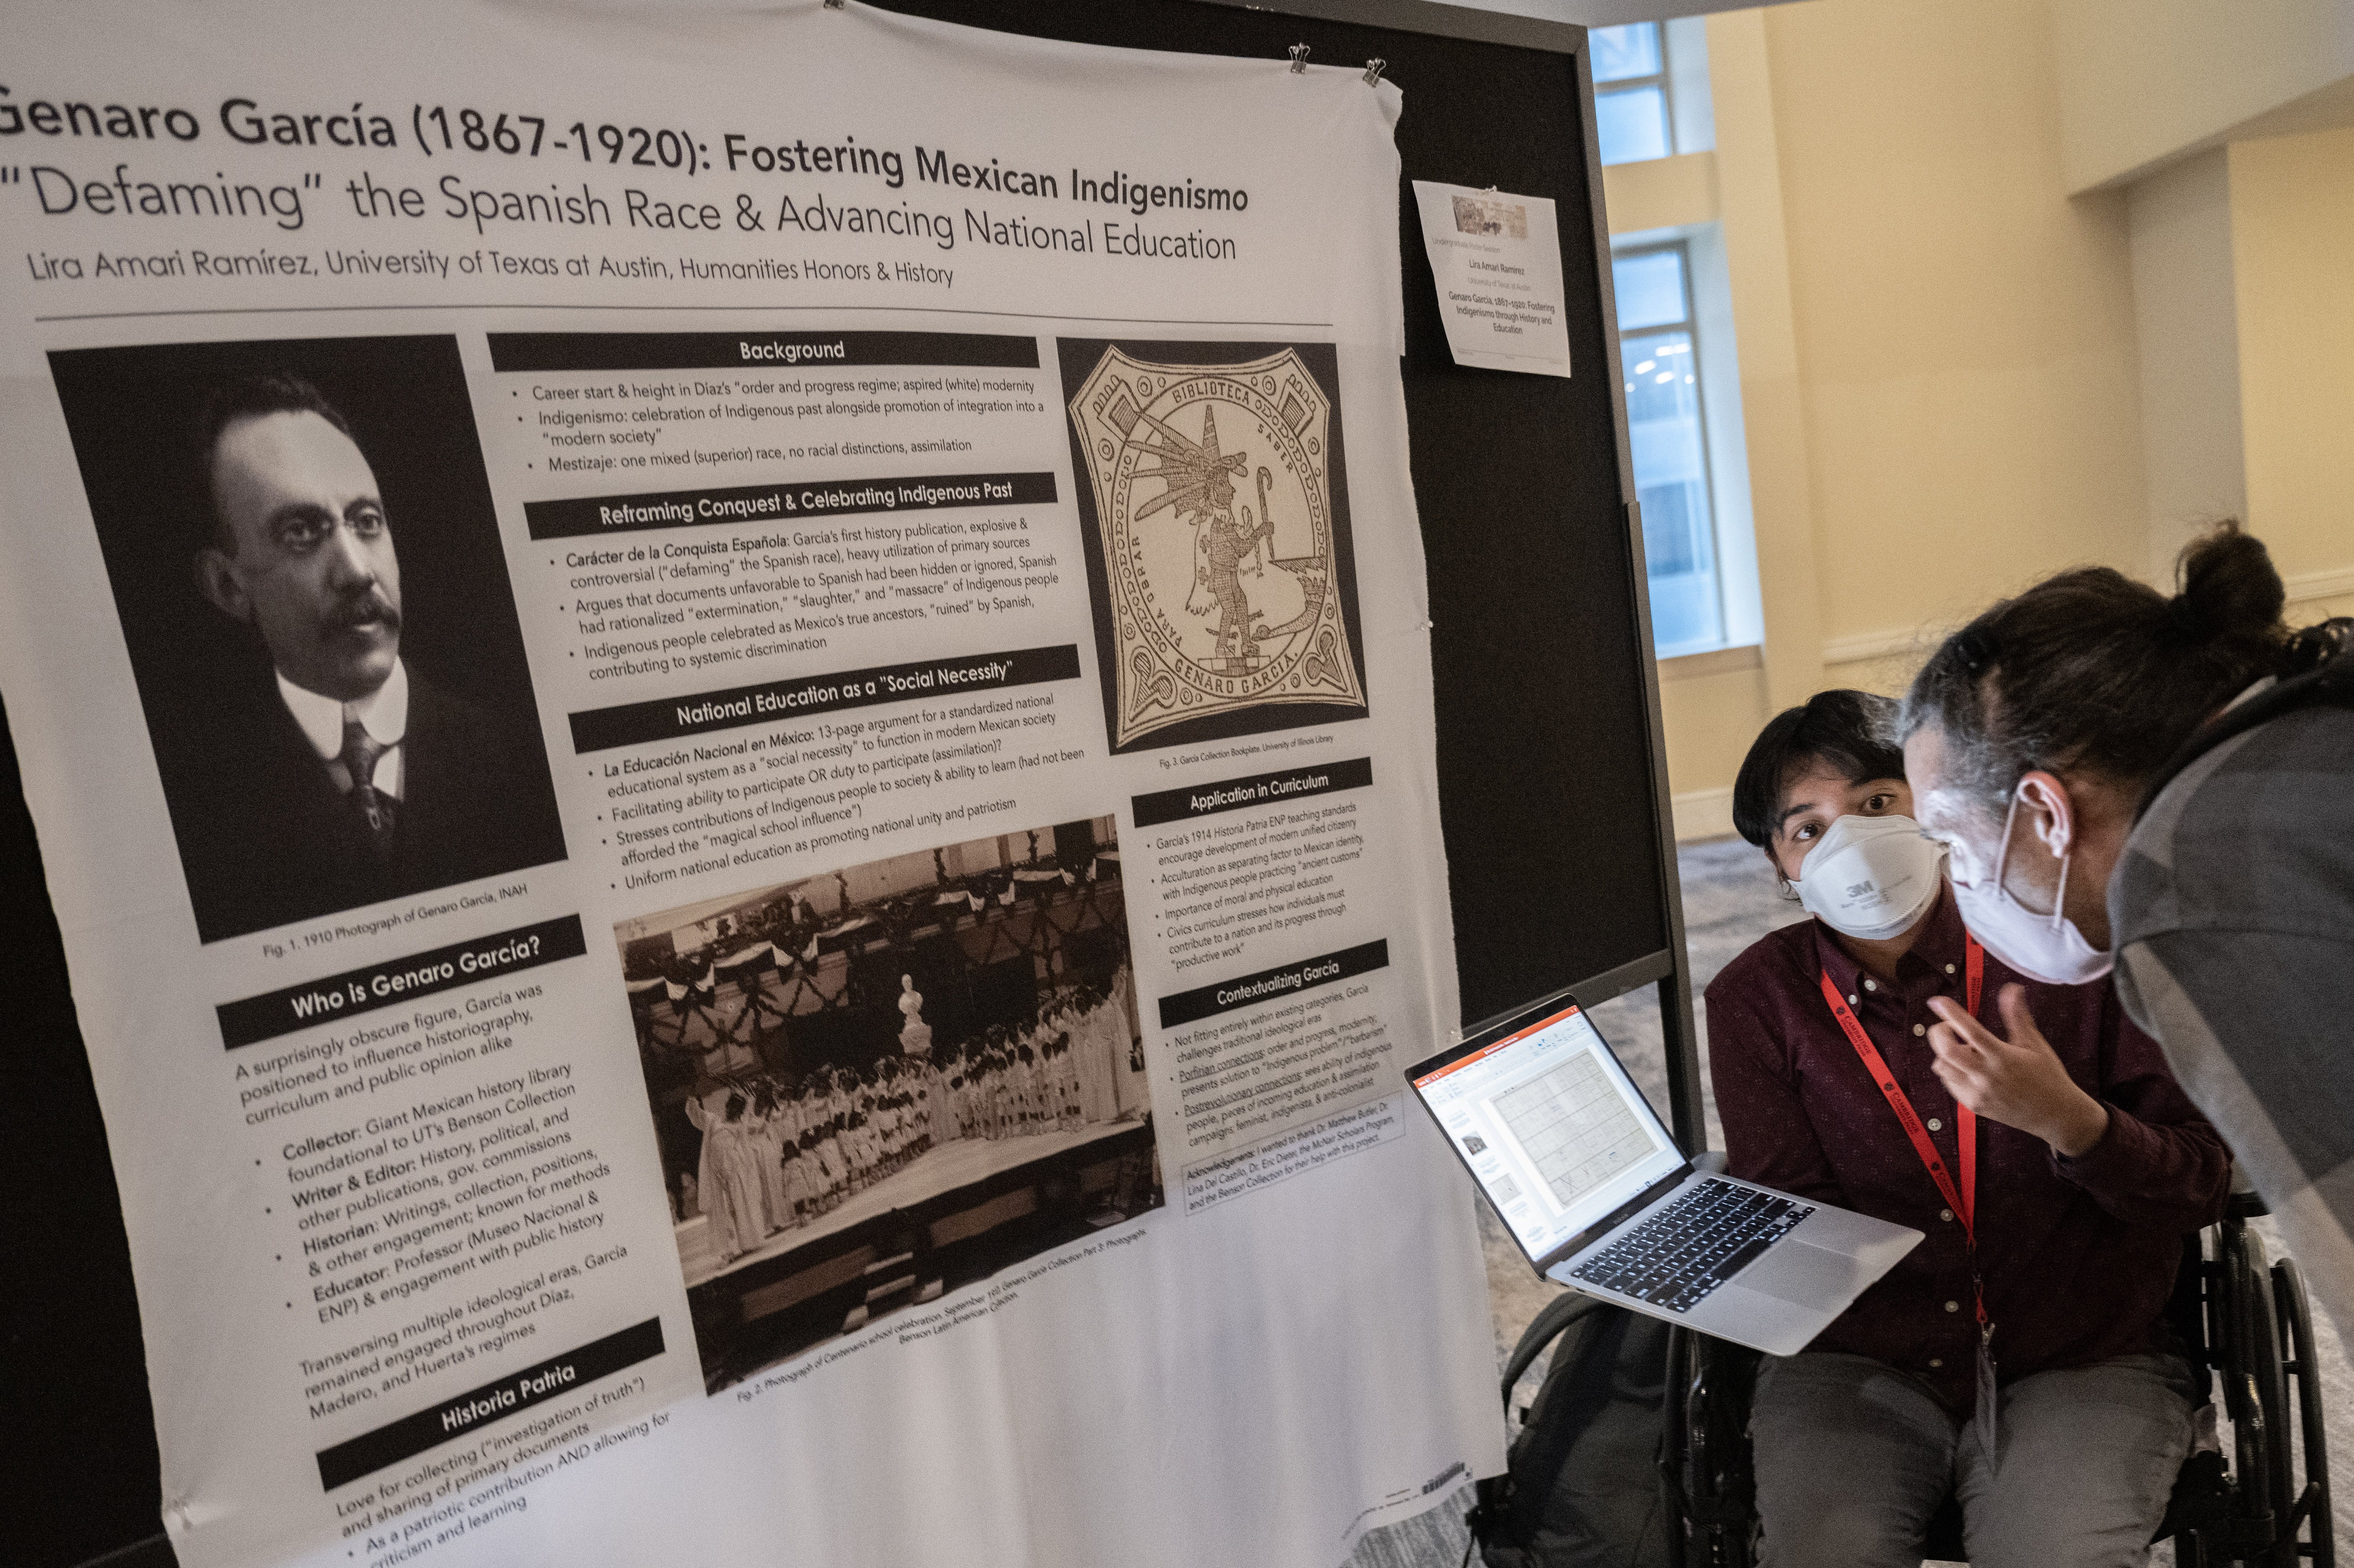 In four poster sessions, presenters such as Lira Amari Ramírez (Univ. of Texas at Austin) shared their research with a broad audience.